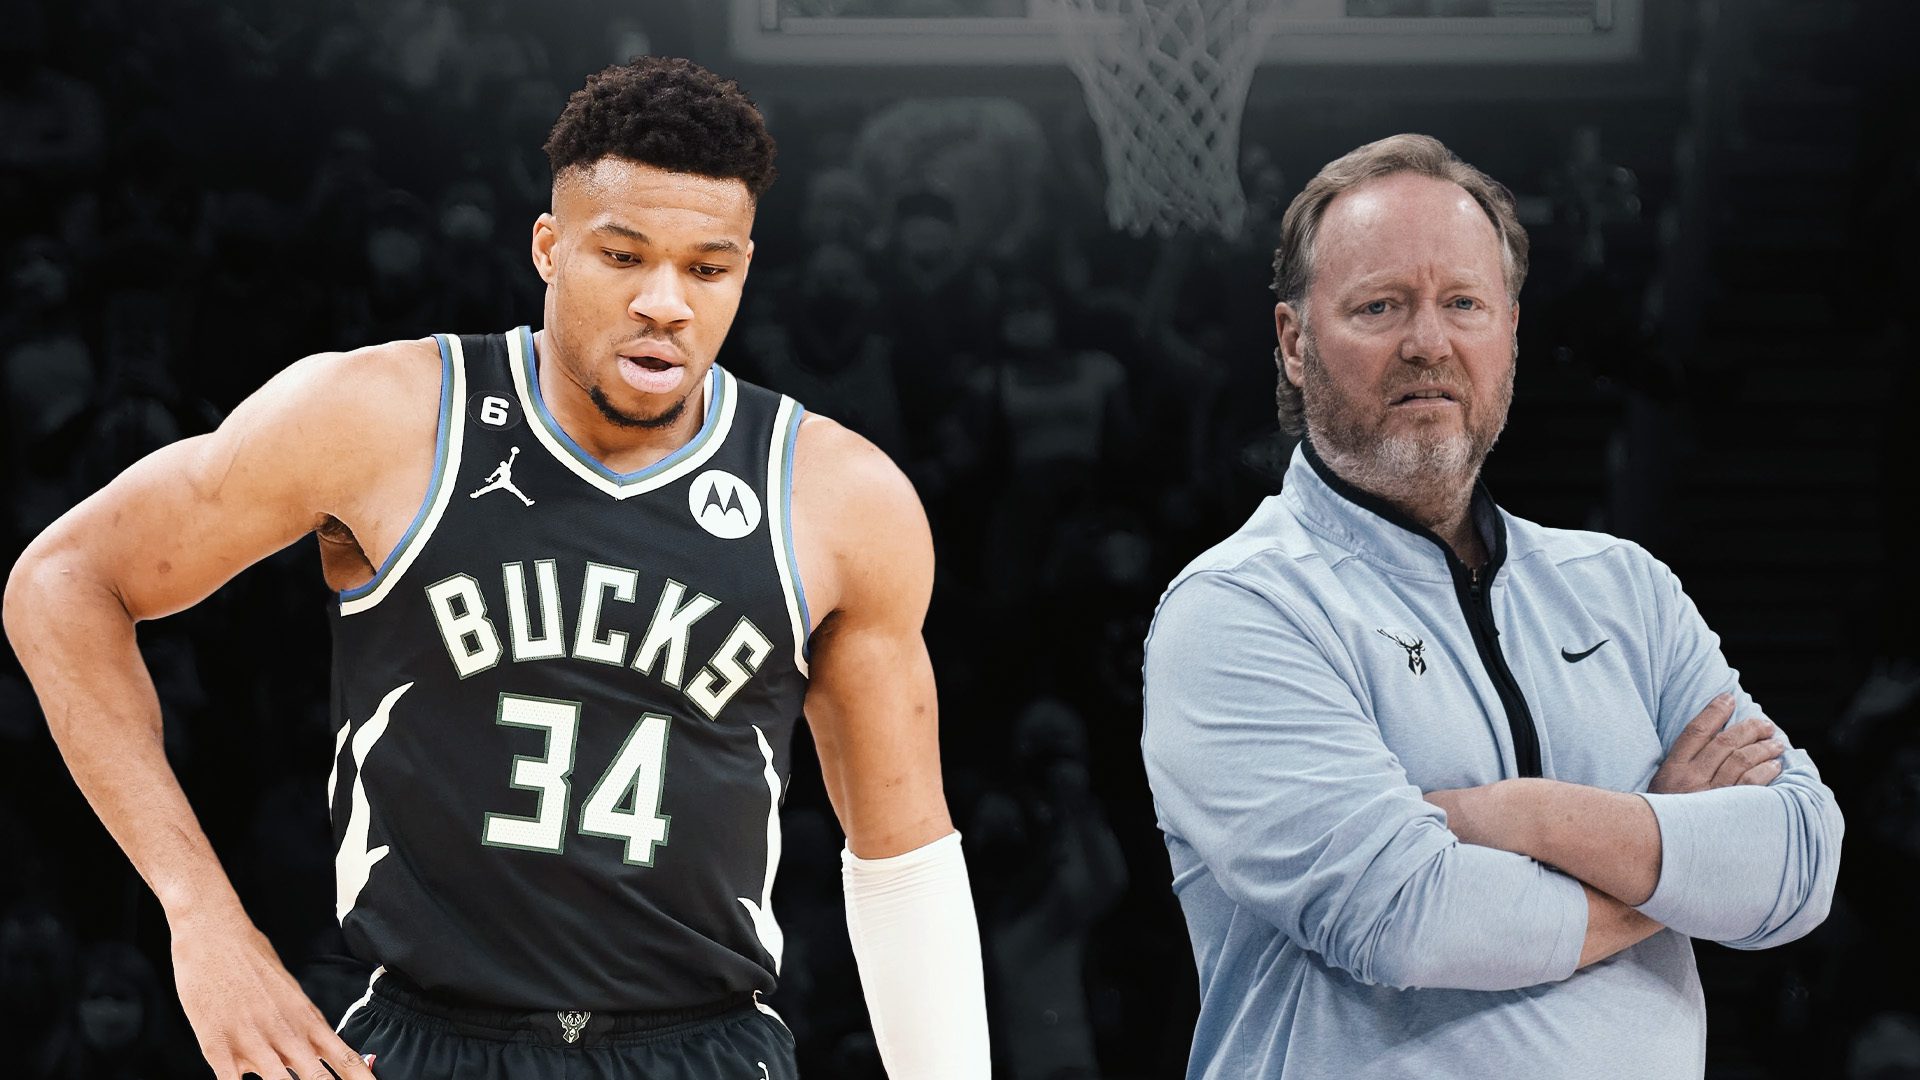 Giannis Played Major Role in Mike Budenholzer’s Firing, Per NBA Insider